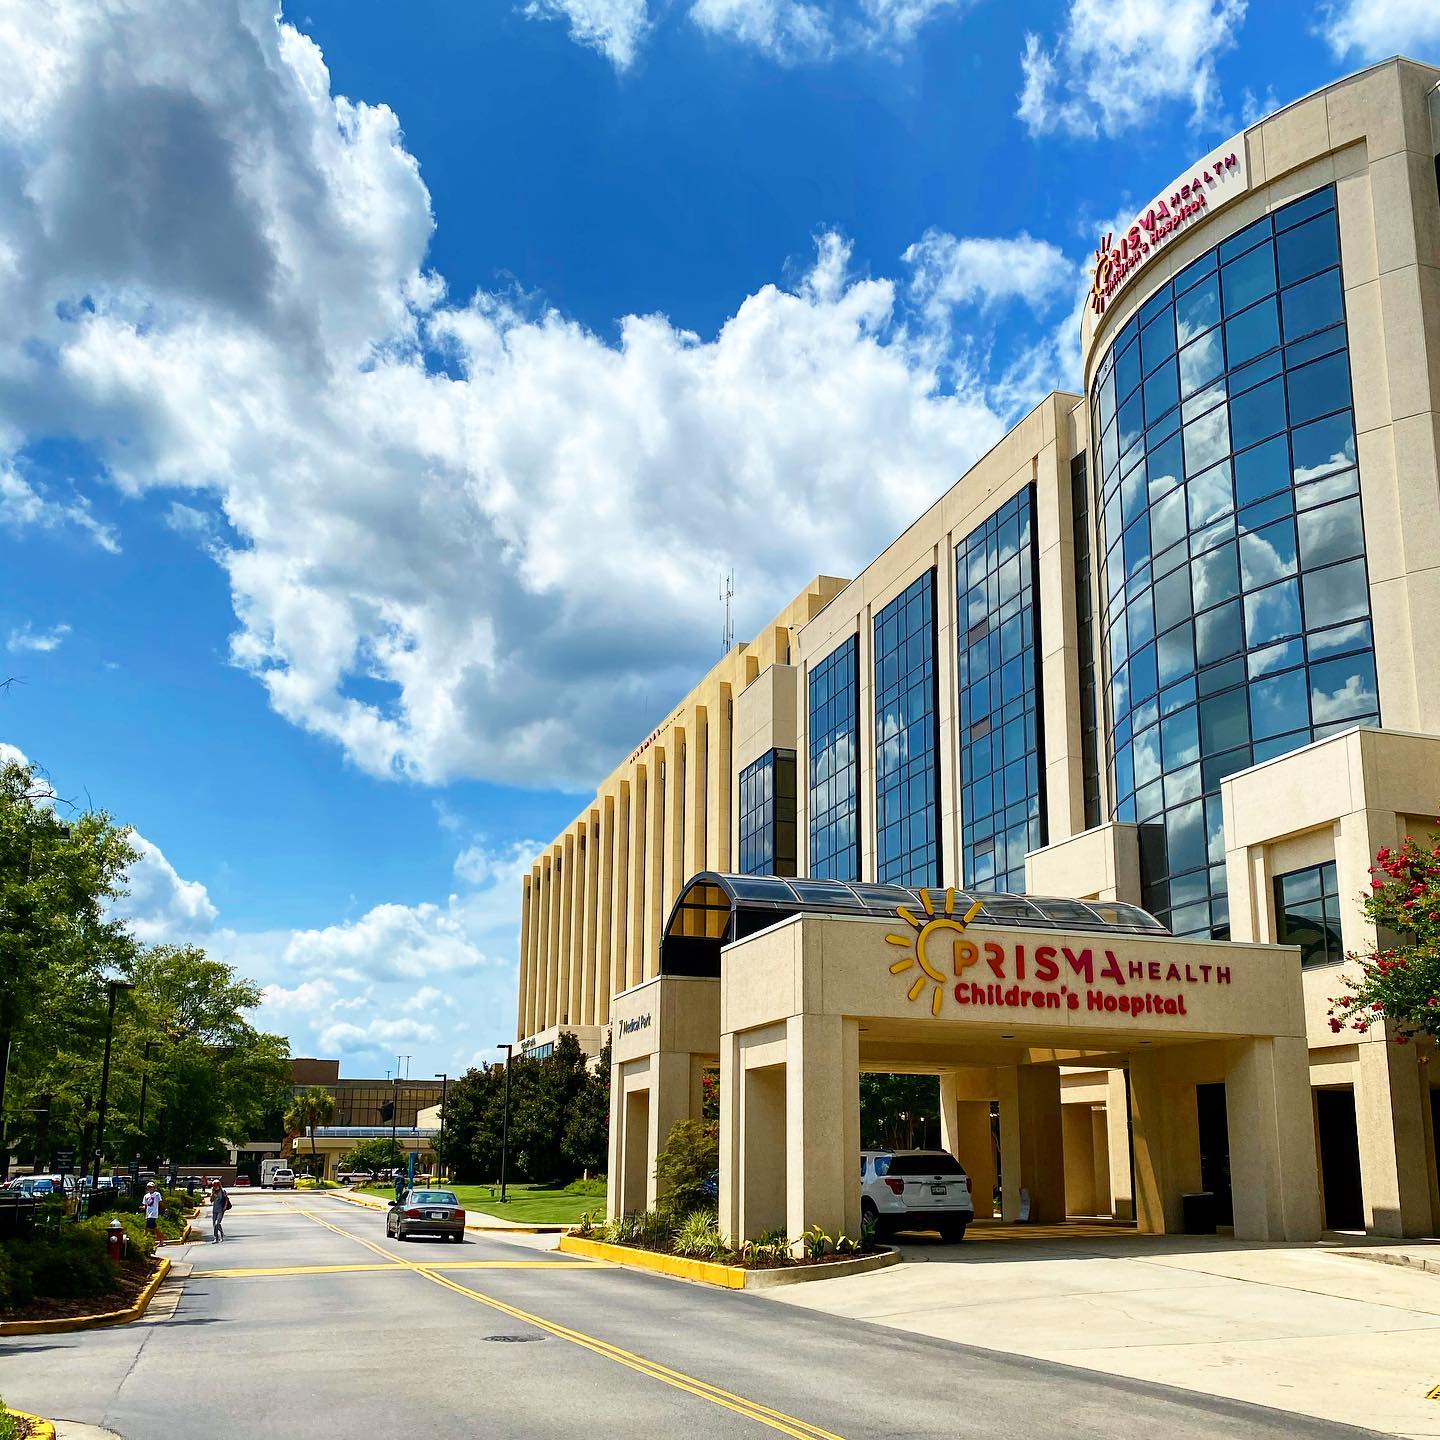 The job market in Columbia, SC includes employers like Prisma Health Children's Hospital (featured). Image by Instagram user @kcrowlshoebie.